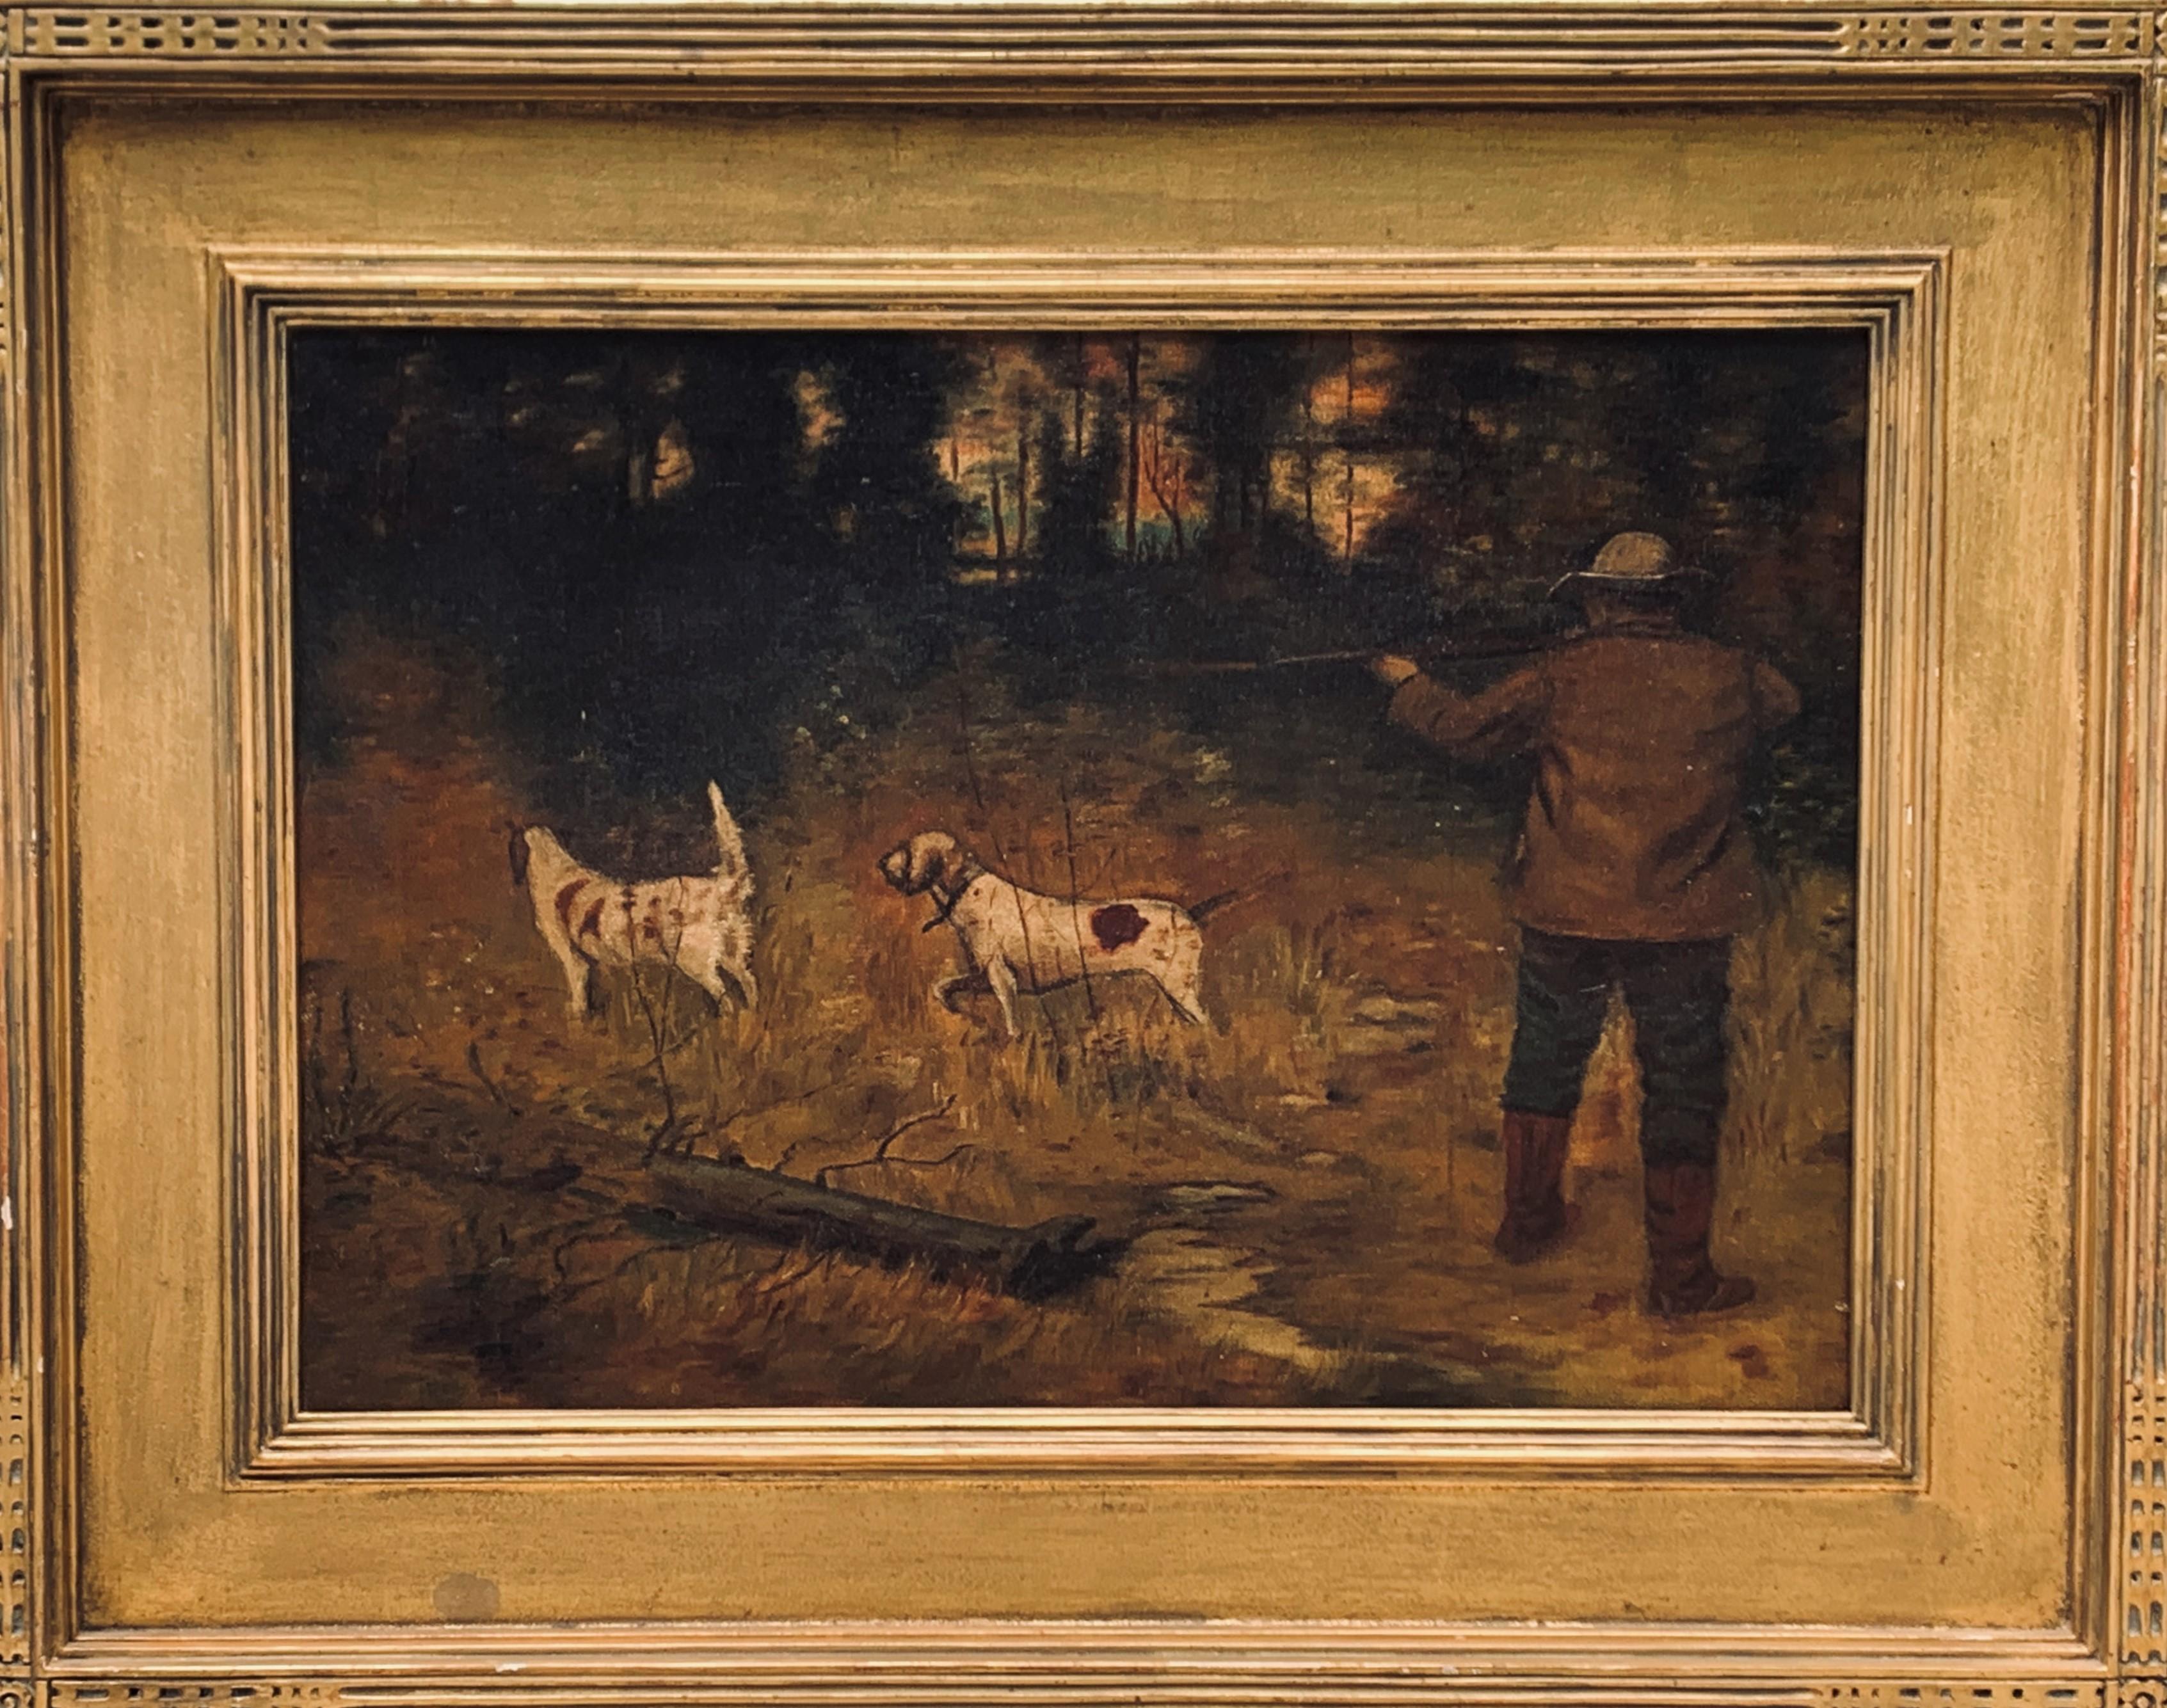 Arthur Burdett Frost Landscape Painting - Possibly by Arthur B. Frost, Illustration of Hunter with Dogs